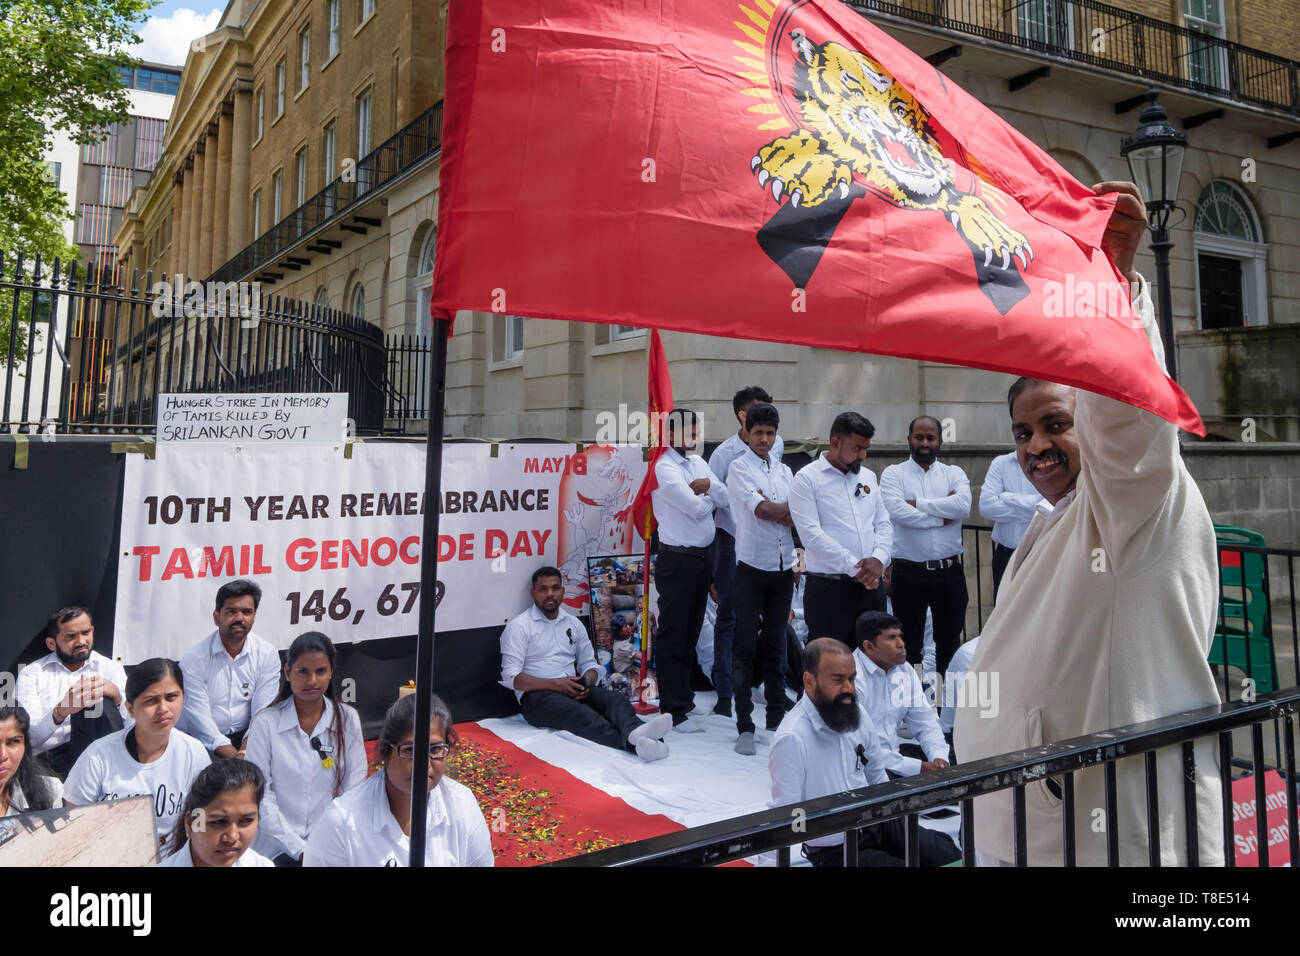 London, UK. 12th May 2019. Tamils begin a hunger strike at Downing St ending on May 18th, Tamil Genocide Remembrance Day, banned in Sri Lanka where it is celebrated as Victory Day by the government. Tamils claim there were 156,689 Tamil civilians unaccounted for at the end of the war, many of them killed by shelling in the last 5 months and no one has been held accountable. They demand recognition of the Tamil Genocide, an International Tribunal to investigate the atrocities and self determination for Tamils in Sri Lanka. Peter Marshall/Alamy Live News Stock Photo